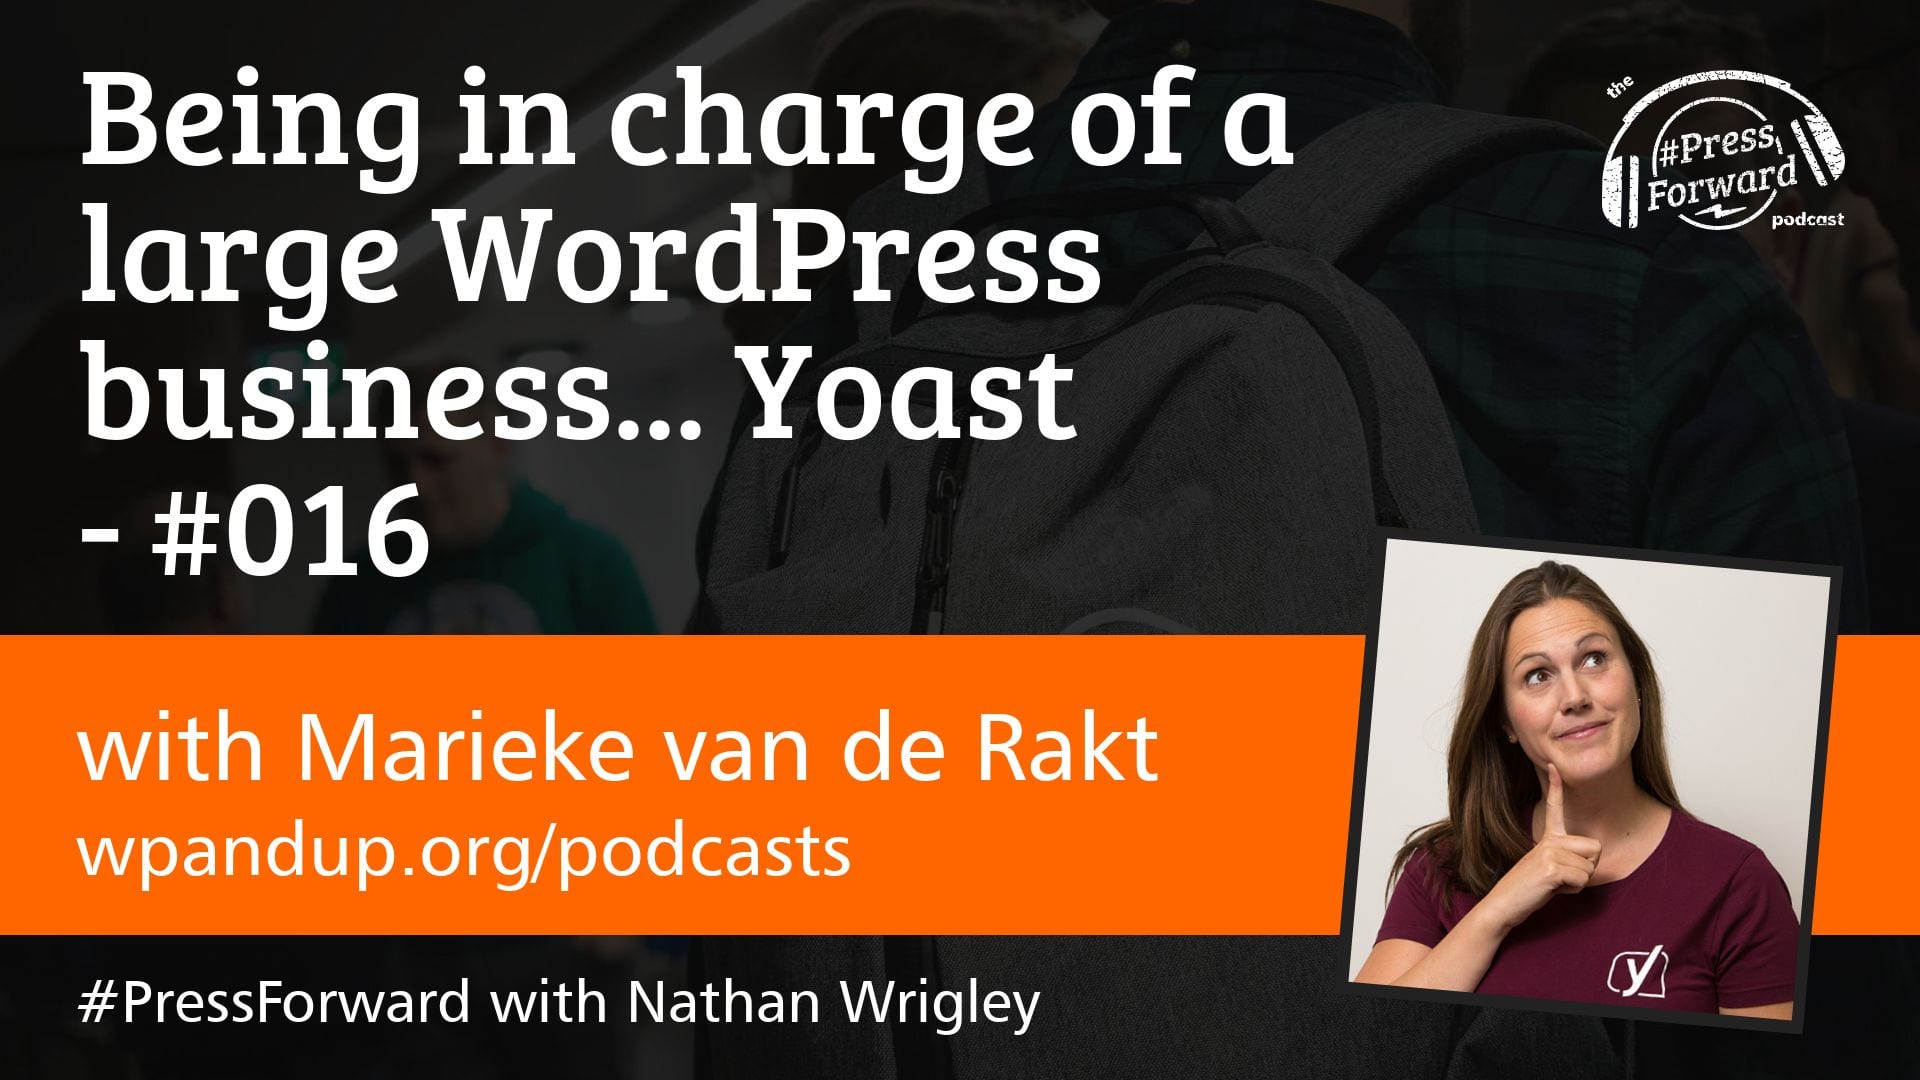 Being in charge of a large WordPress business... Yoast - #016